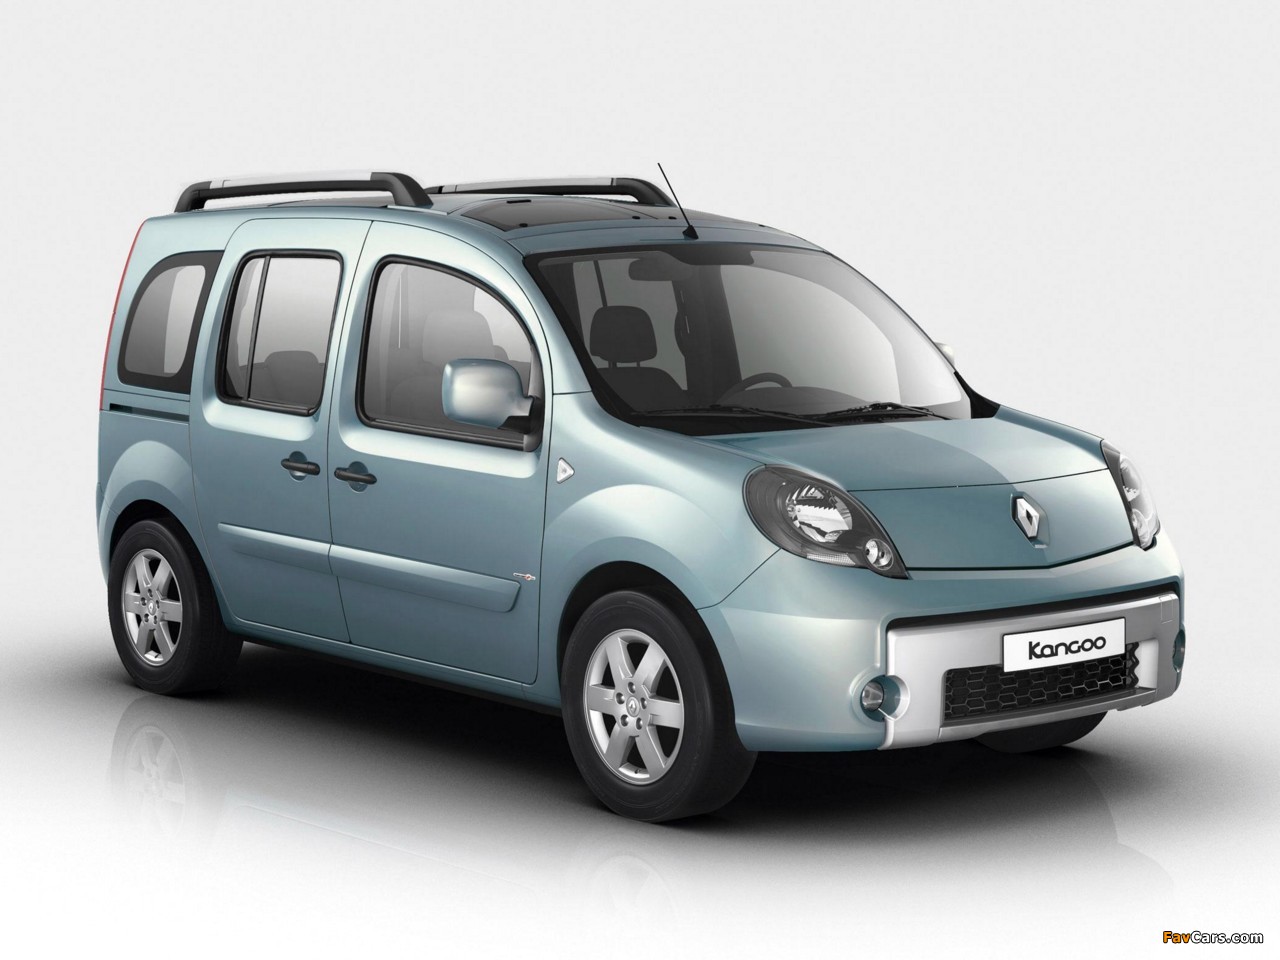 Renault Kangoo Allroad TomTom Edition 2010 pictures (1280 x 960)